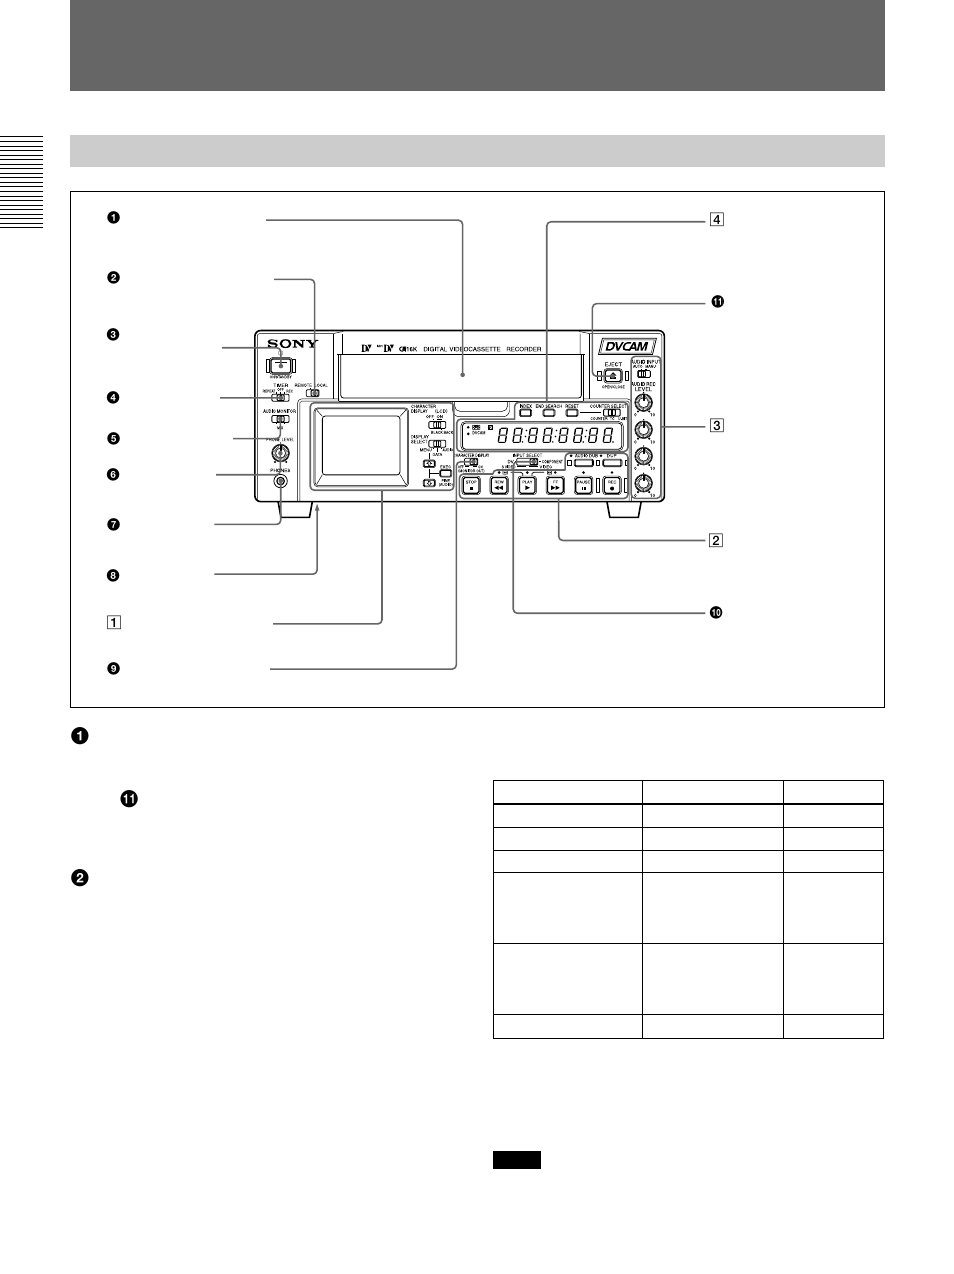 Location and function of parts, Front panel | Sony DSR-45/45P Manuel d'utilisation | Page 12 / 220